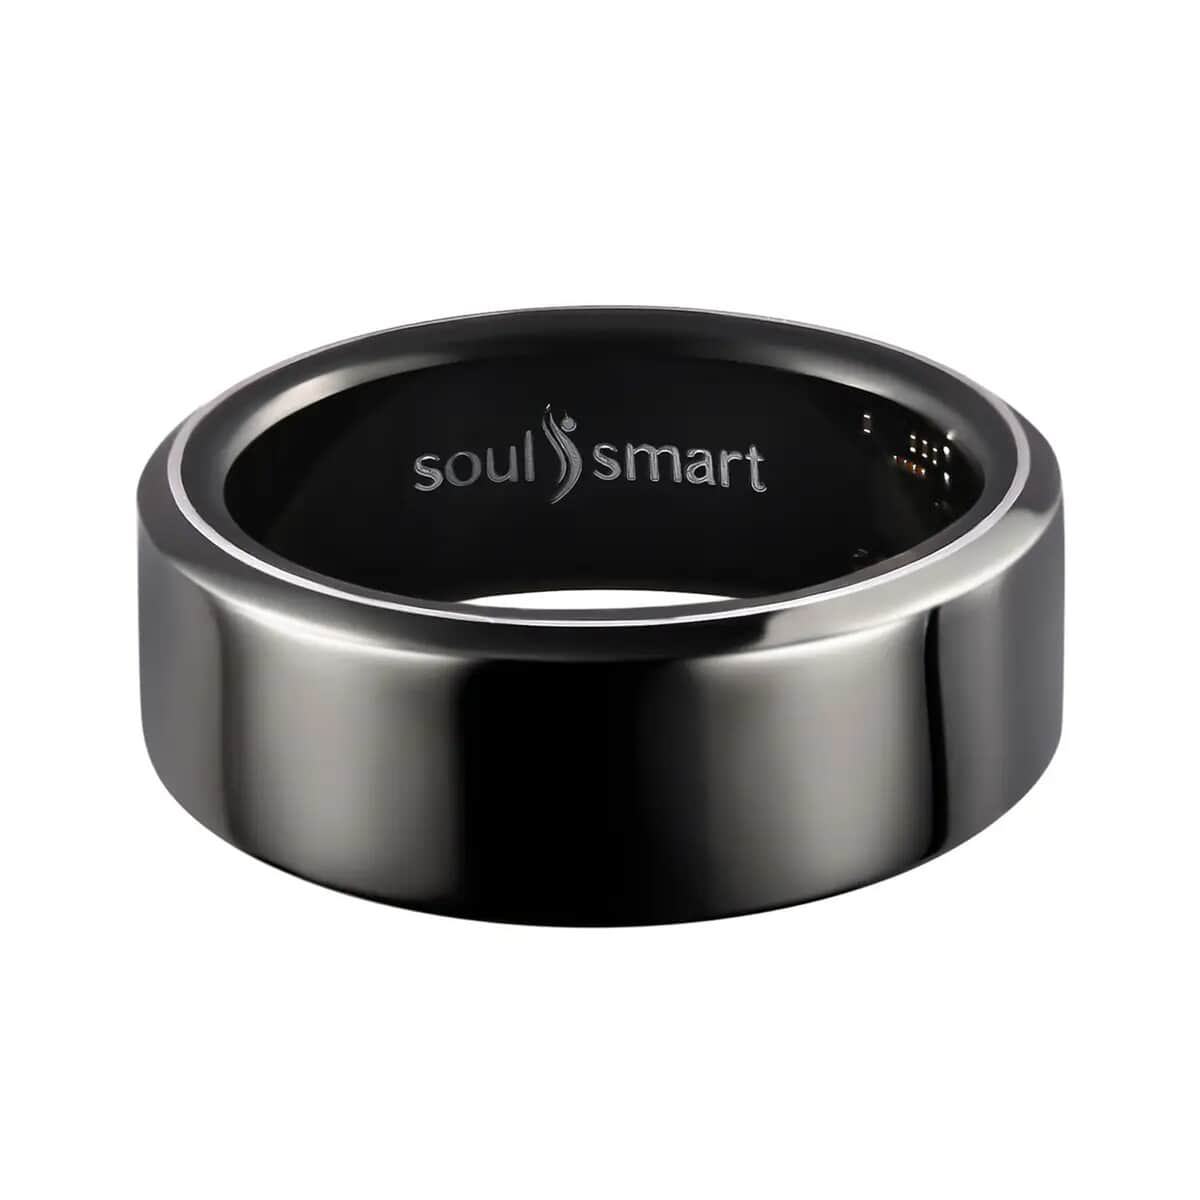 Soulsmart Multifunctional Health Tracker Smart Ring (Size 9.0) in ION Plated Black Stainless Steel (Compatible with Android 5.0+ & Apple IOS 10.0+ Systems) image number 2